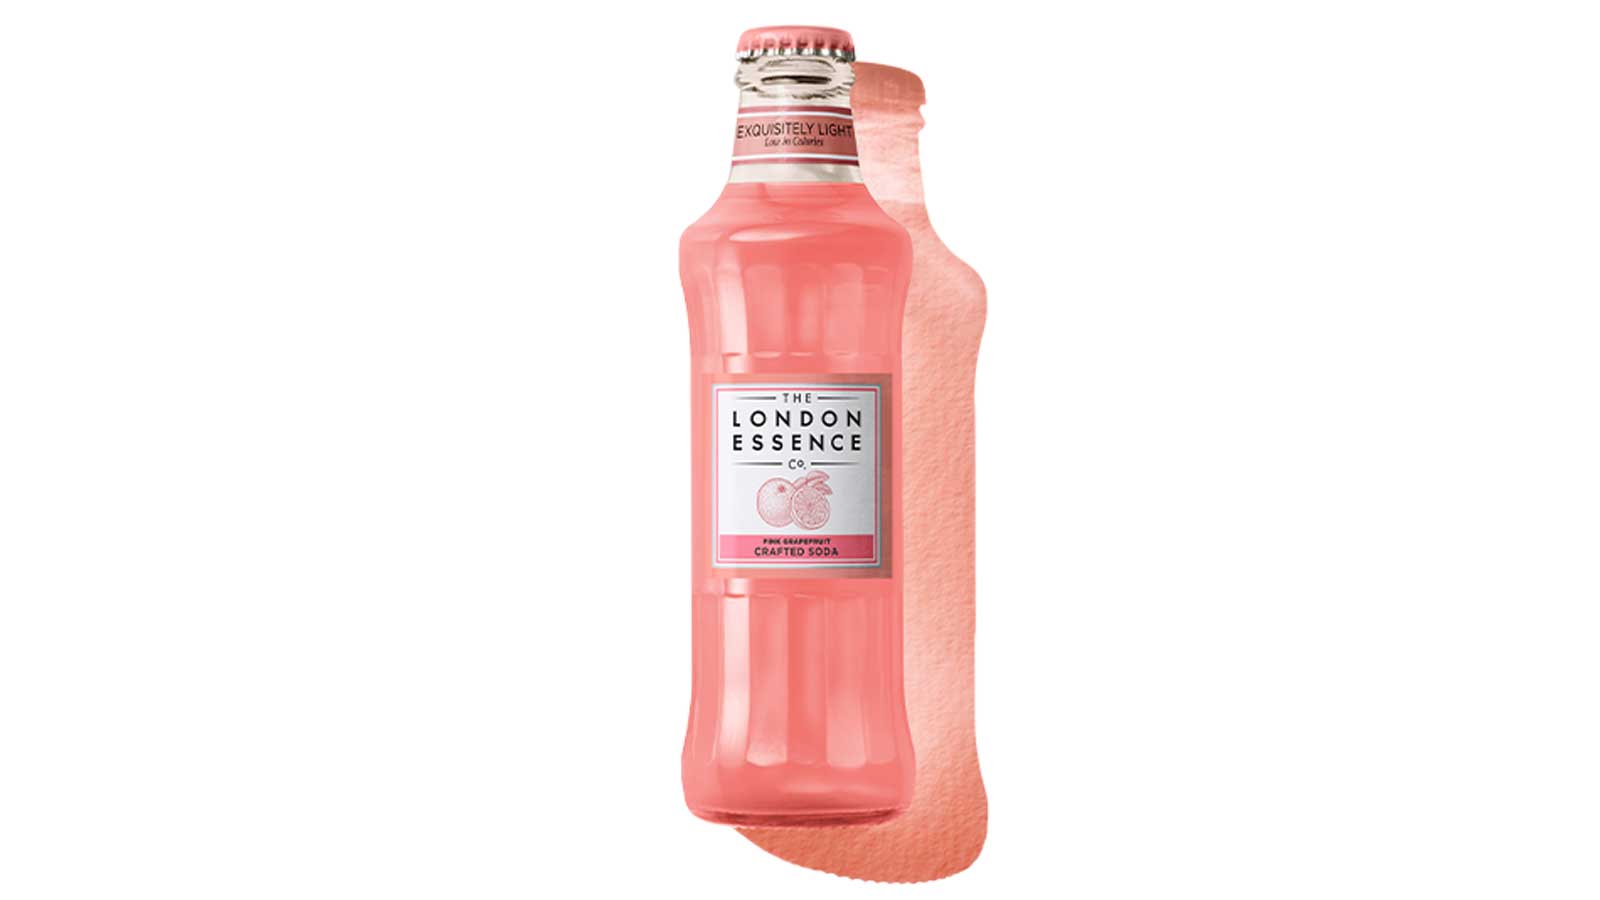 London Essence launches new Pink Grapefruit Soda in time for elevated summer sipping 